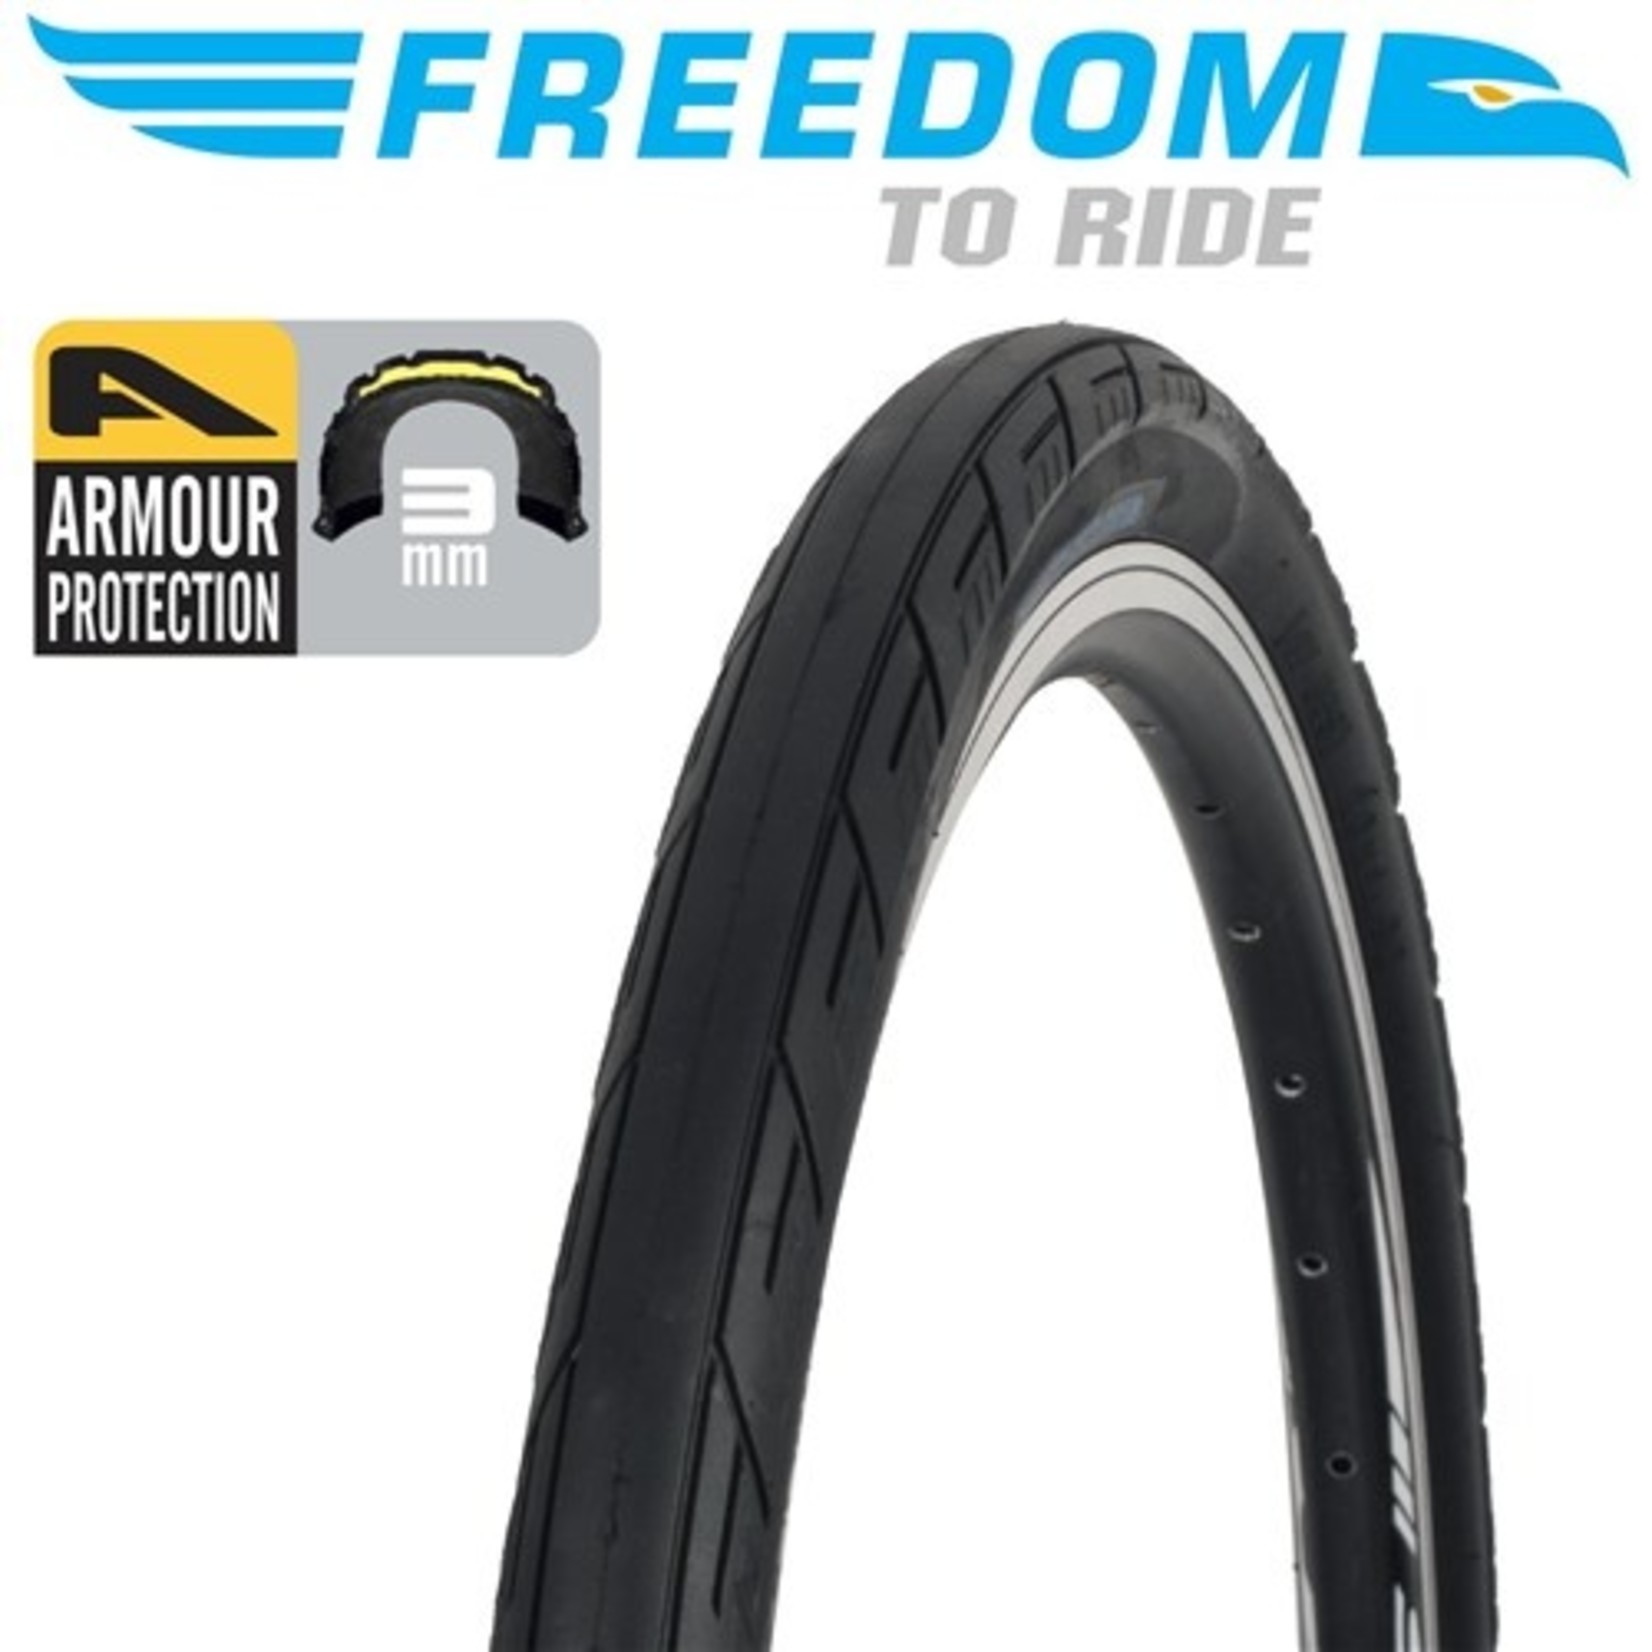 Freedom 2 X Freedom Bike Tyre - Roadrunner Armour Protection - 700 X 28C - Tyre (Pair)